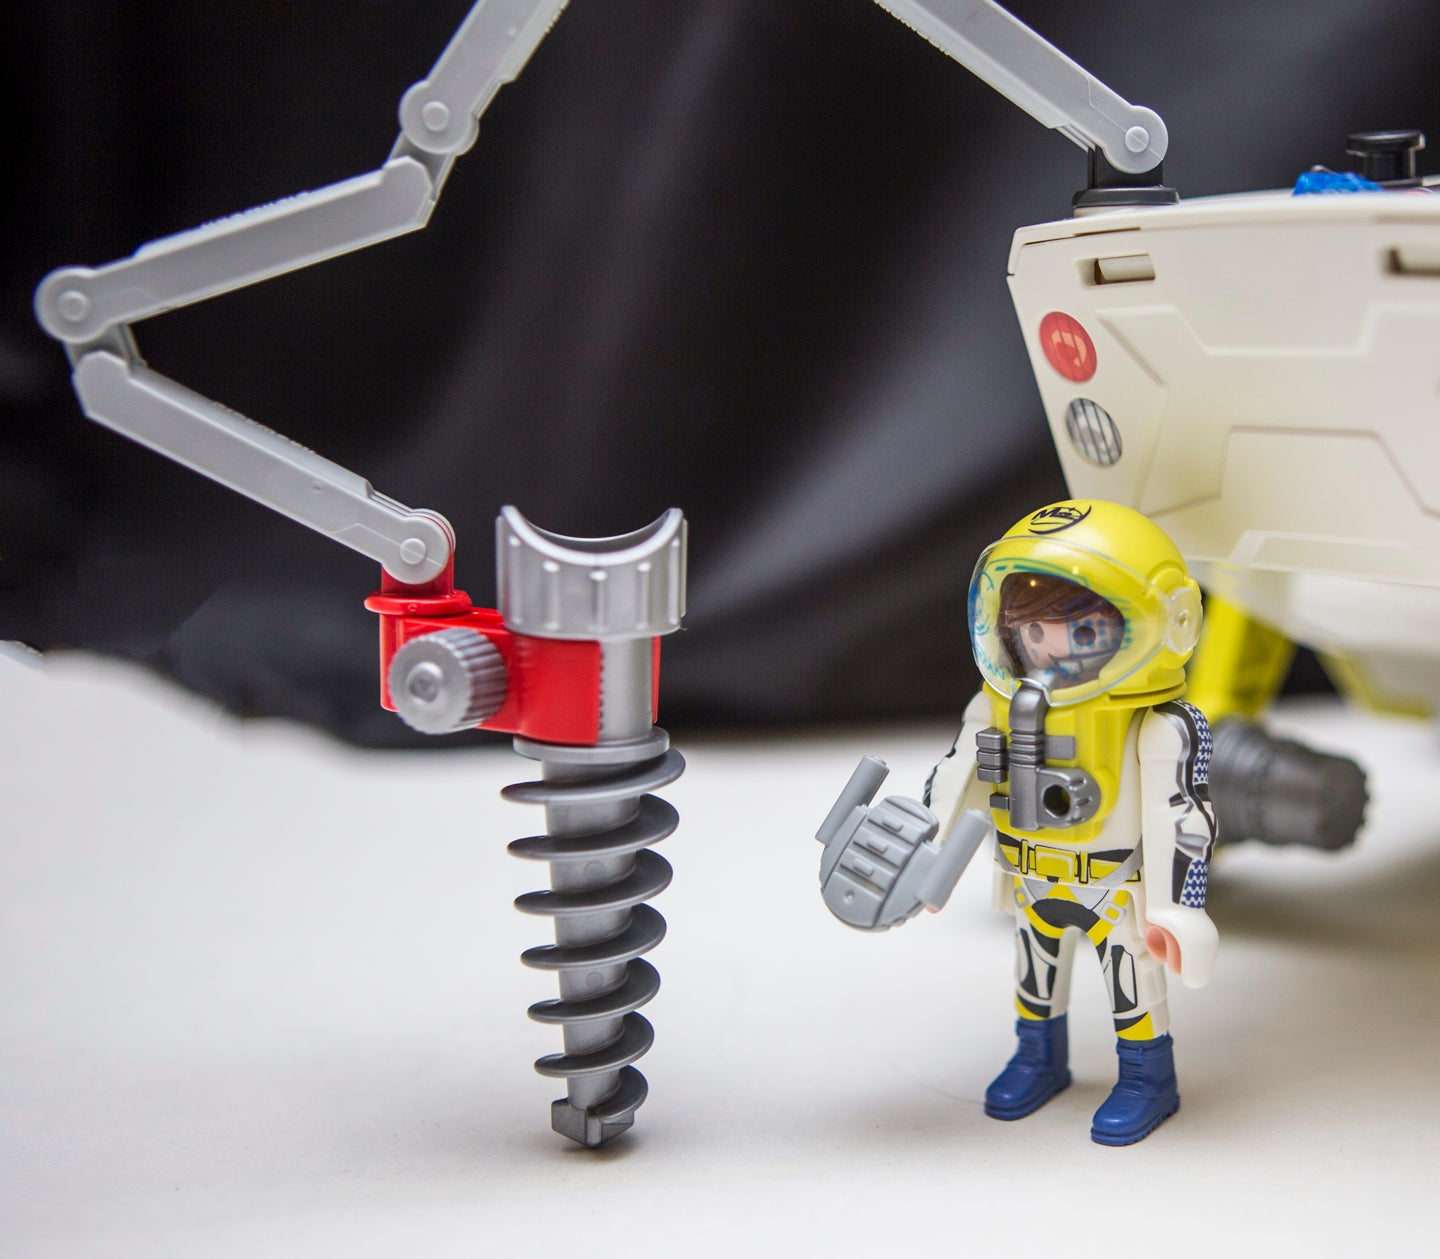 Playmobil Rocket Sports and Action 6187 Playset Jouet Toy Review 